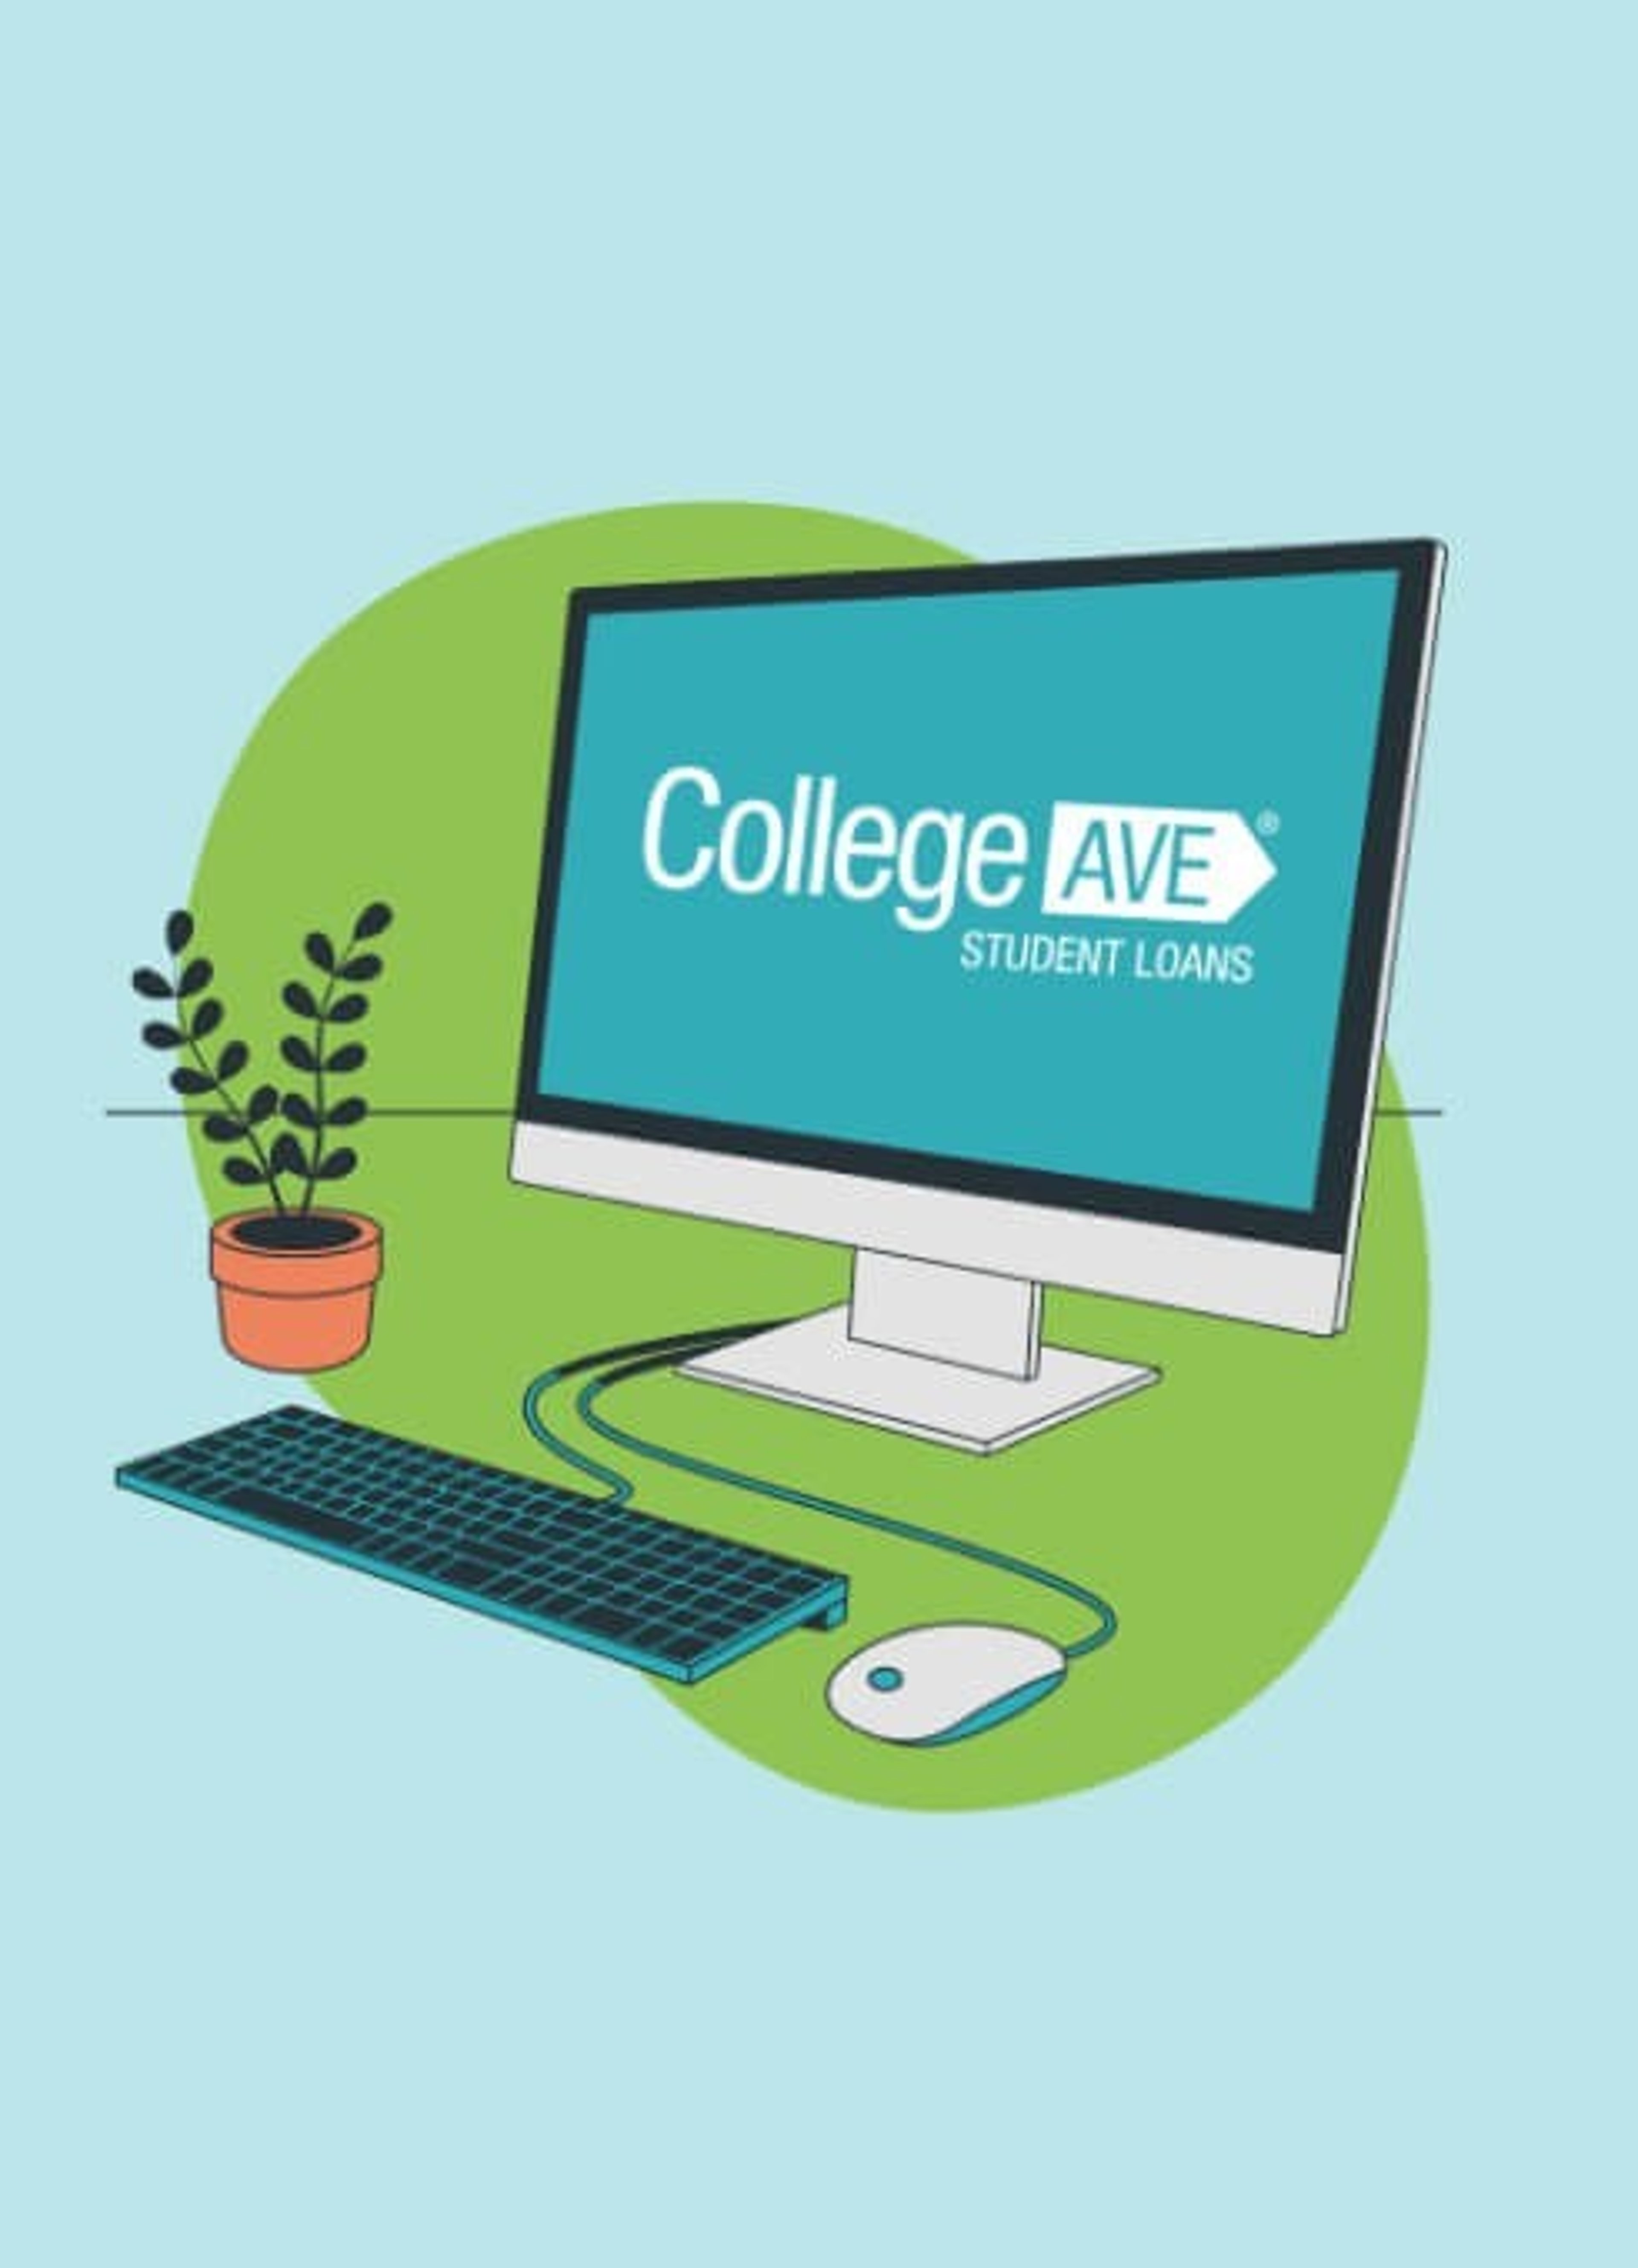 College Ave infographic logo on computer screen